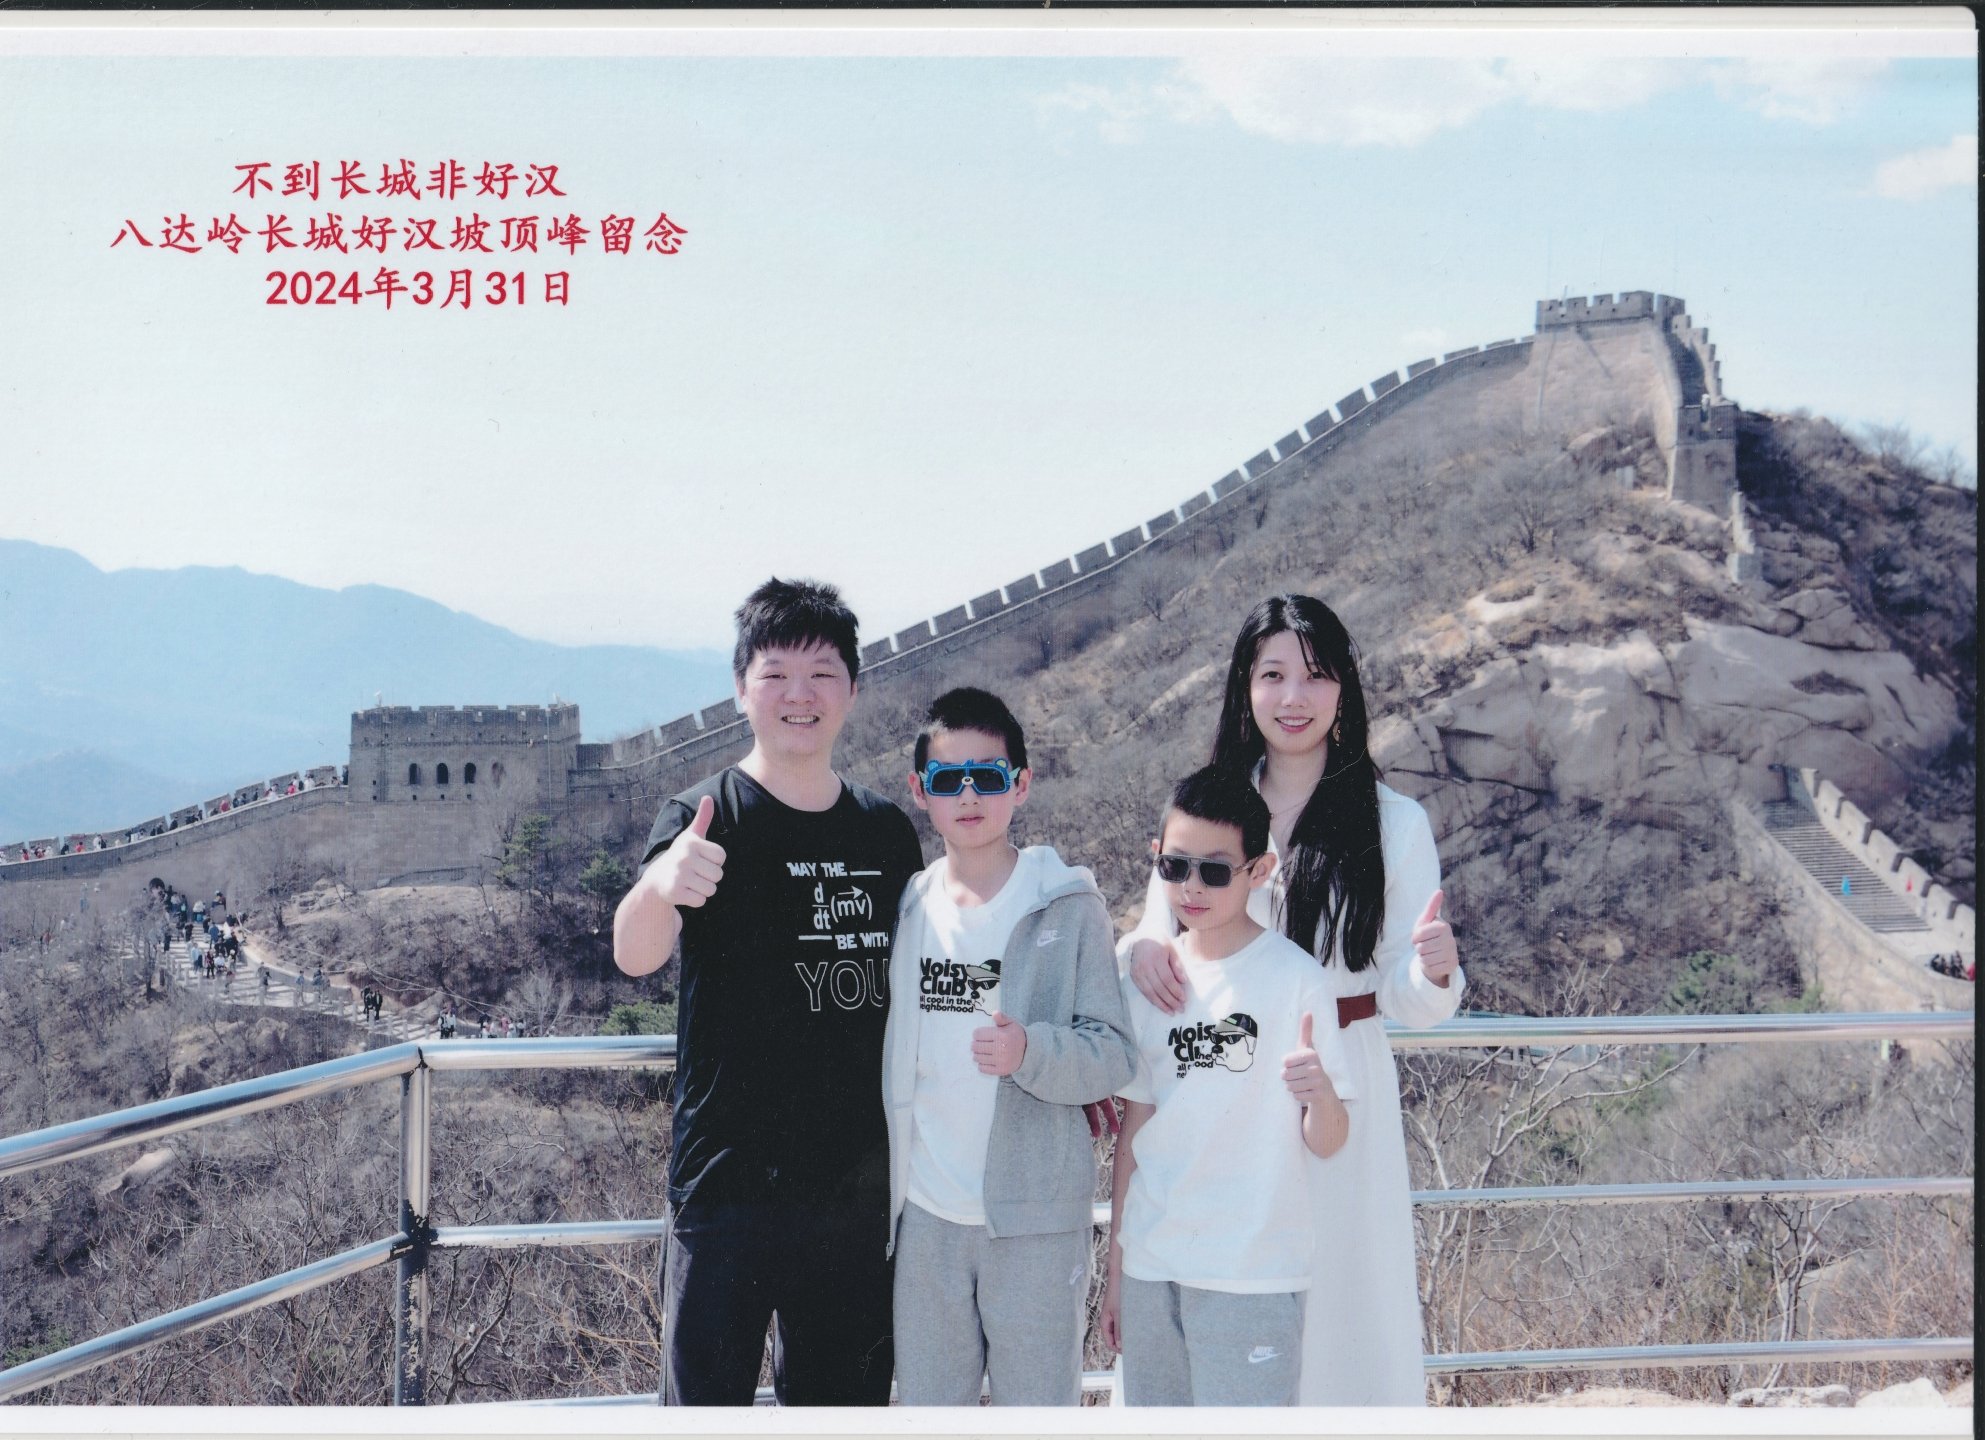  The great wall family photo 2024-04-13-14.07.44 Not a hero without visiting the Great Wall: Badaling Great Wall Hero Peak Photo Information 